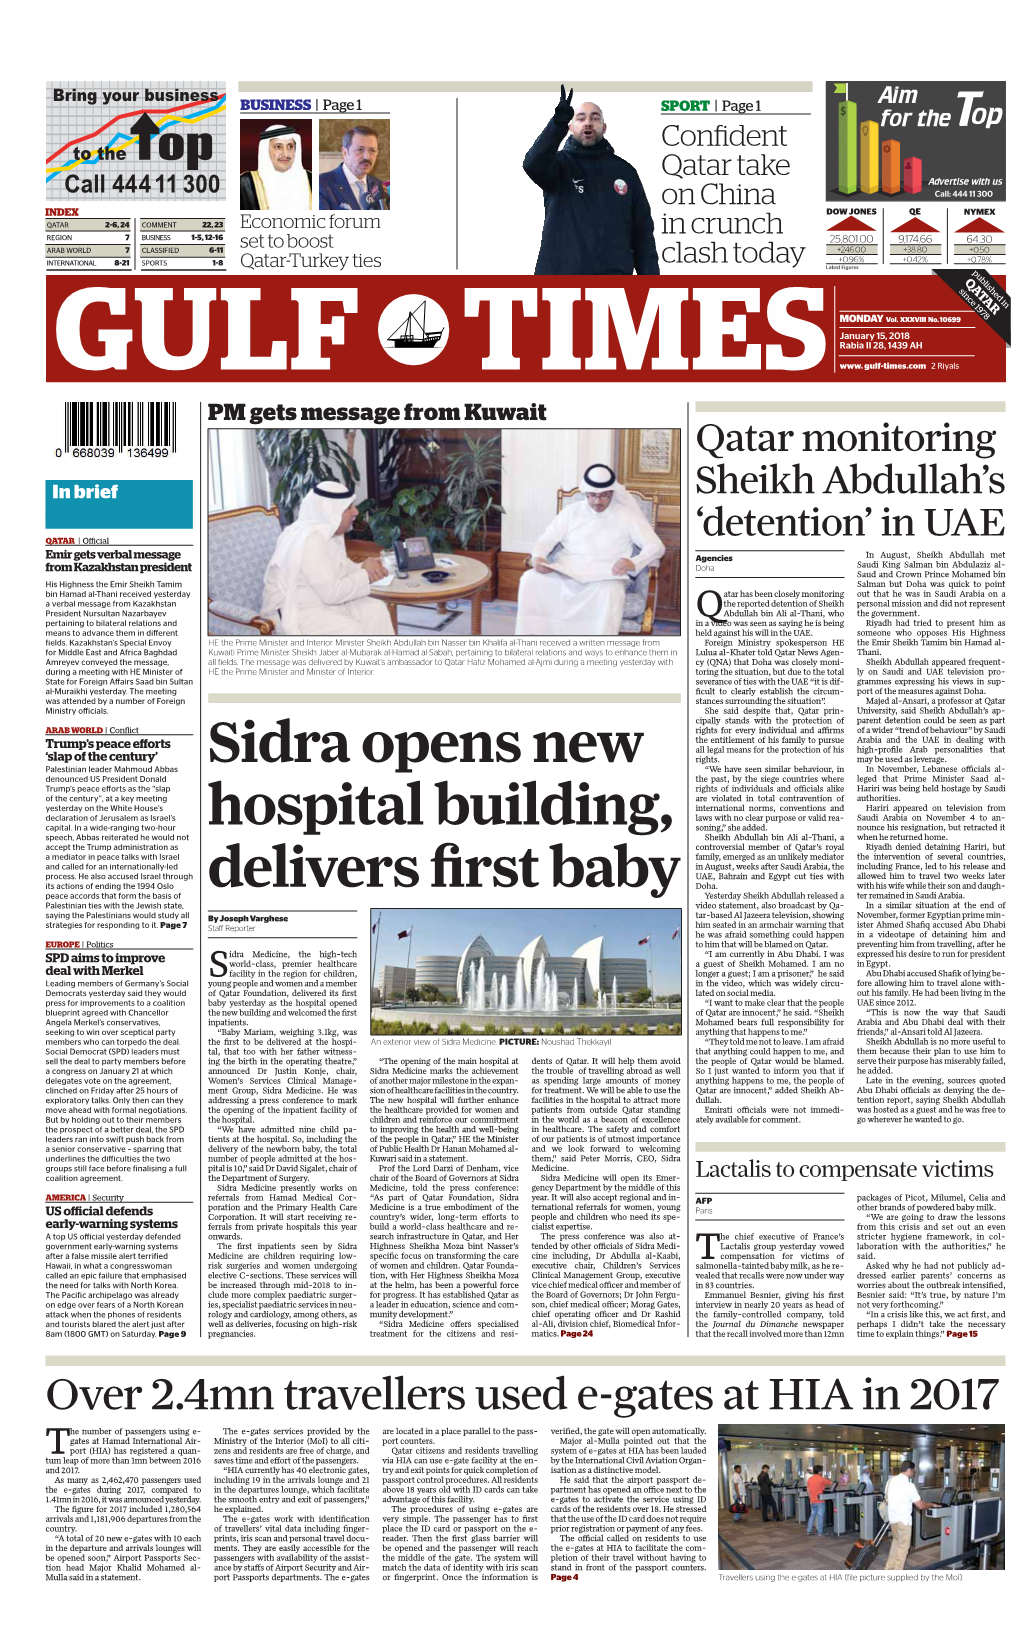 Sidra Opens New Hospital Building, Delivers First Baby